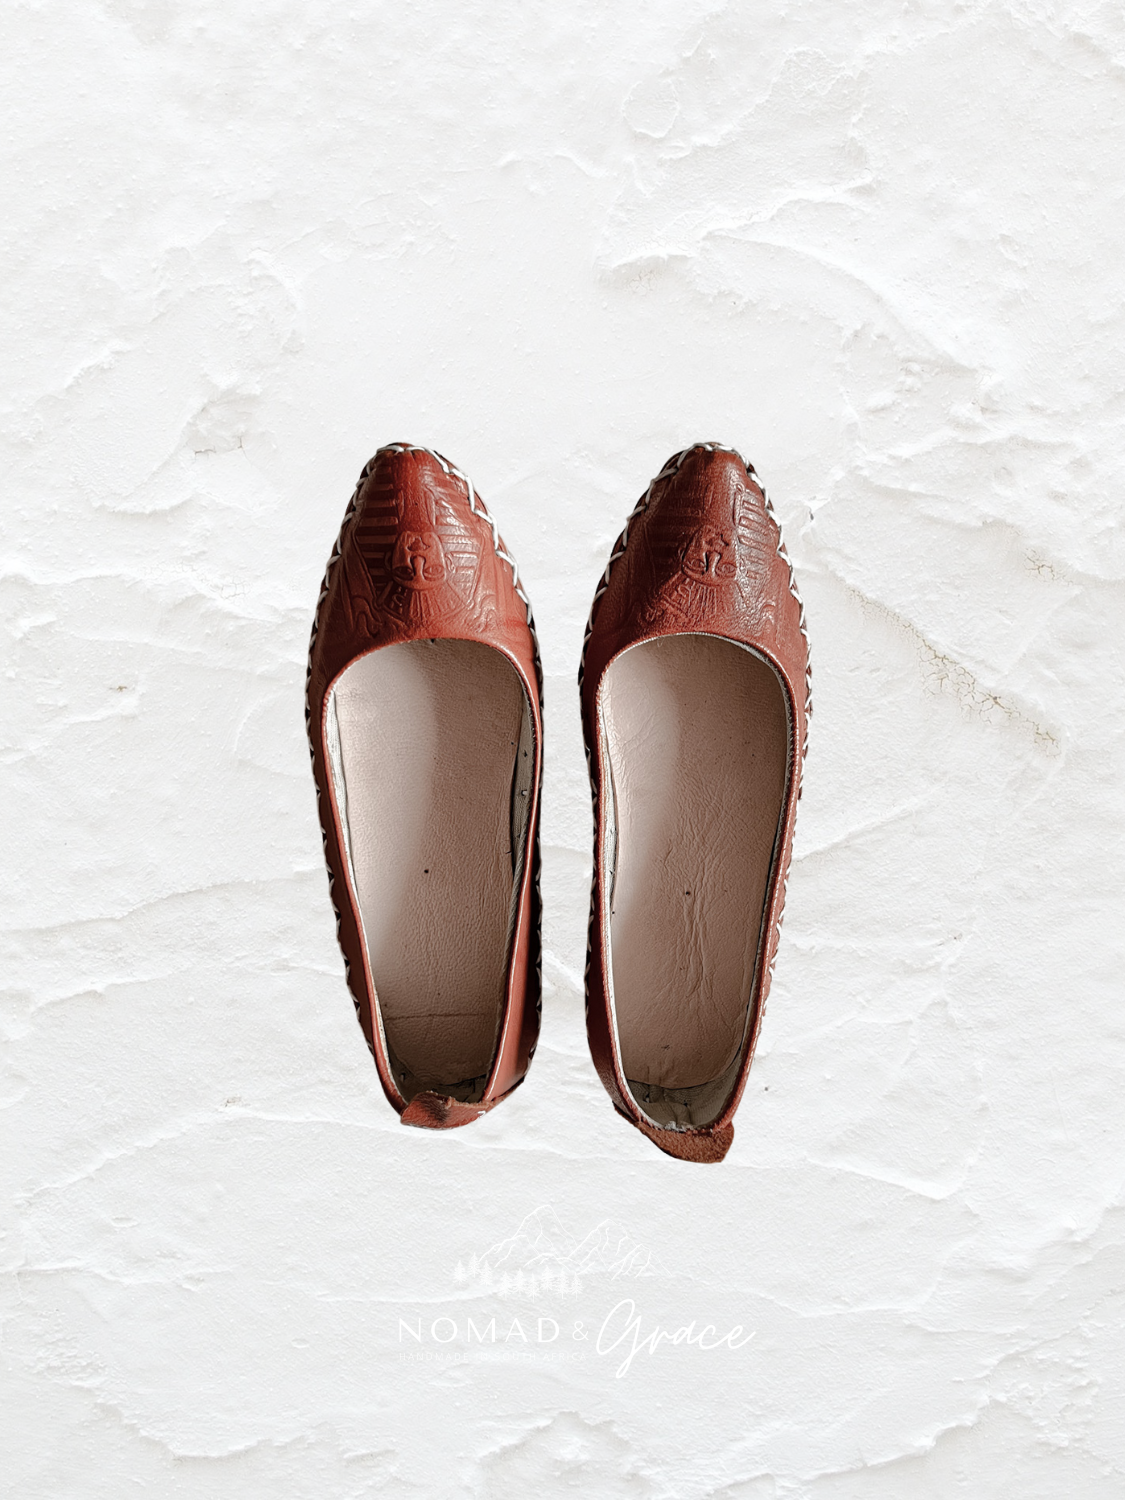 Hand-Sewn Imported Egyptian Leather Shoes